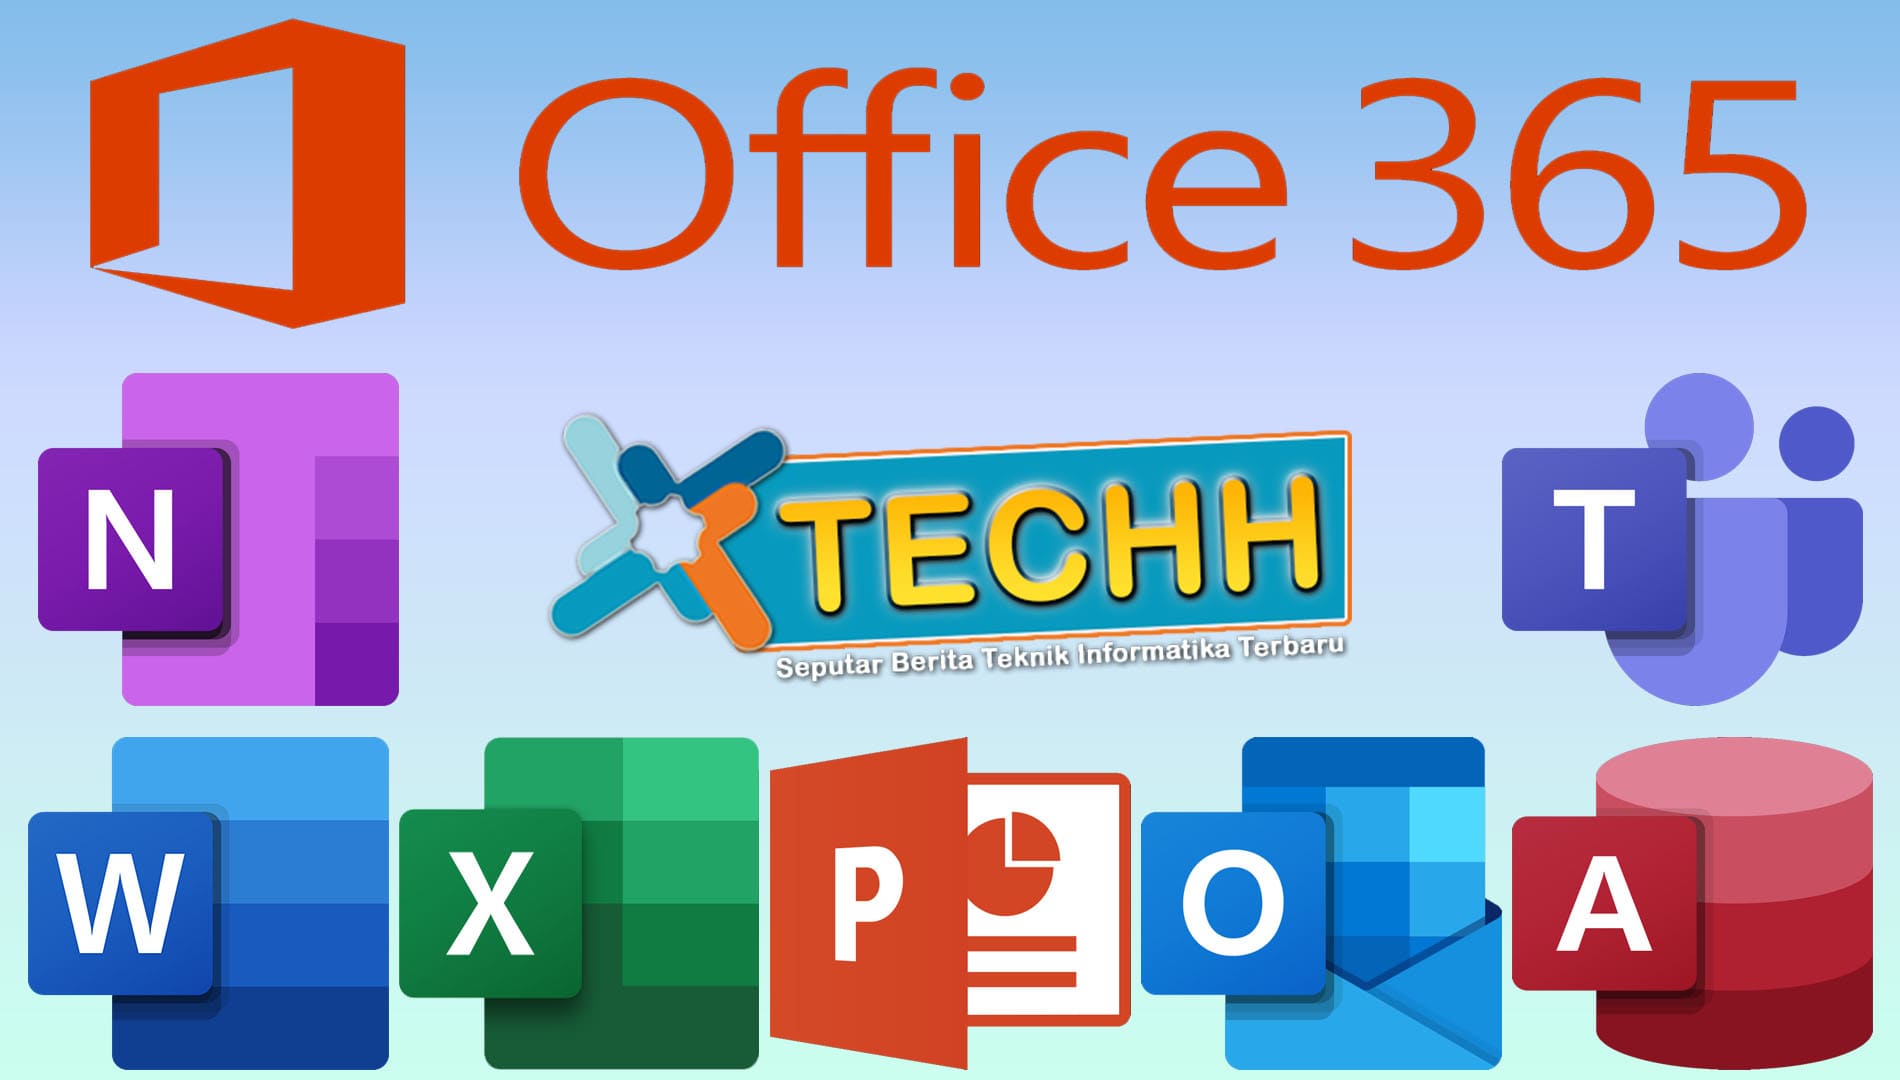 The Ultimate Guide to Microsoft Office: Everything You Need to Know